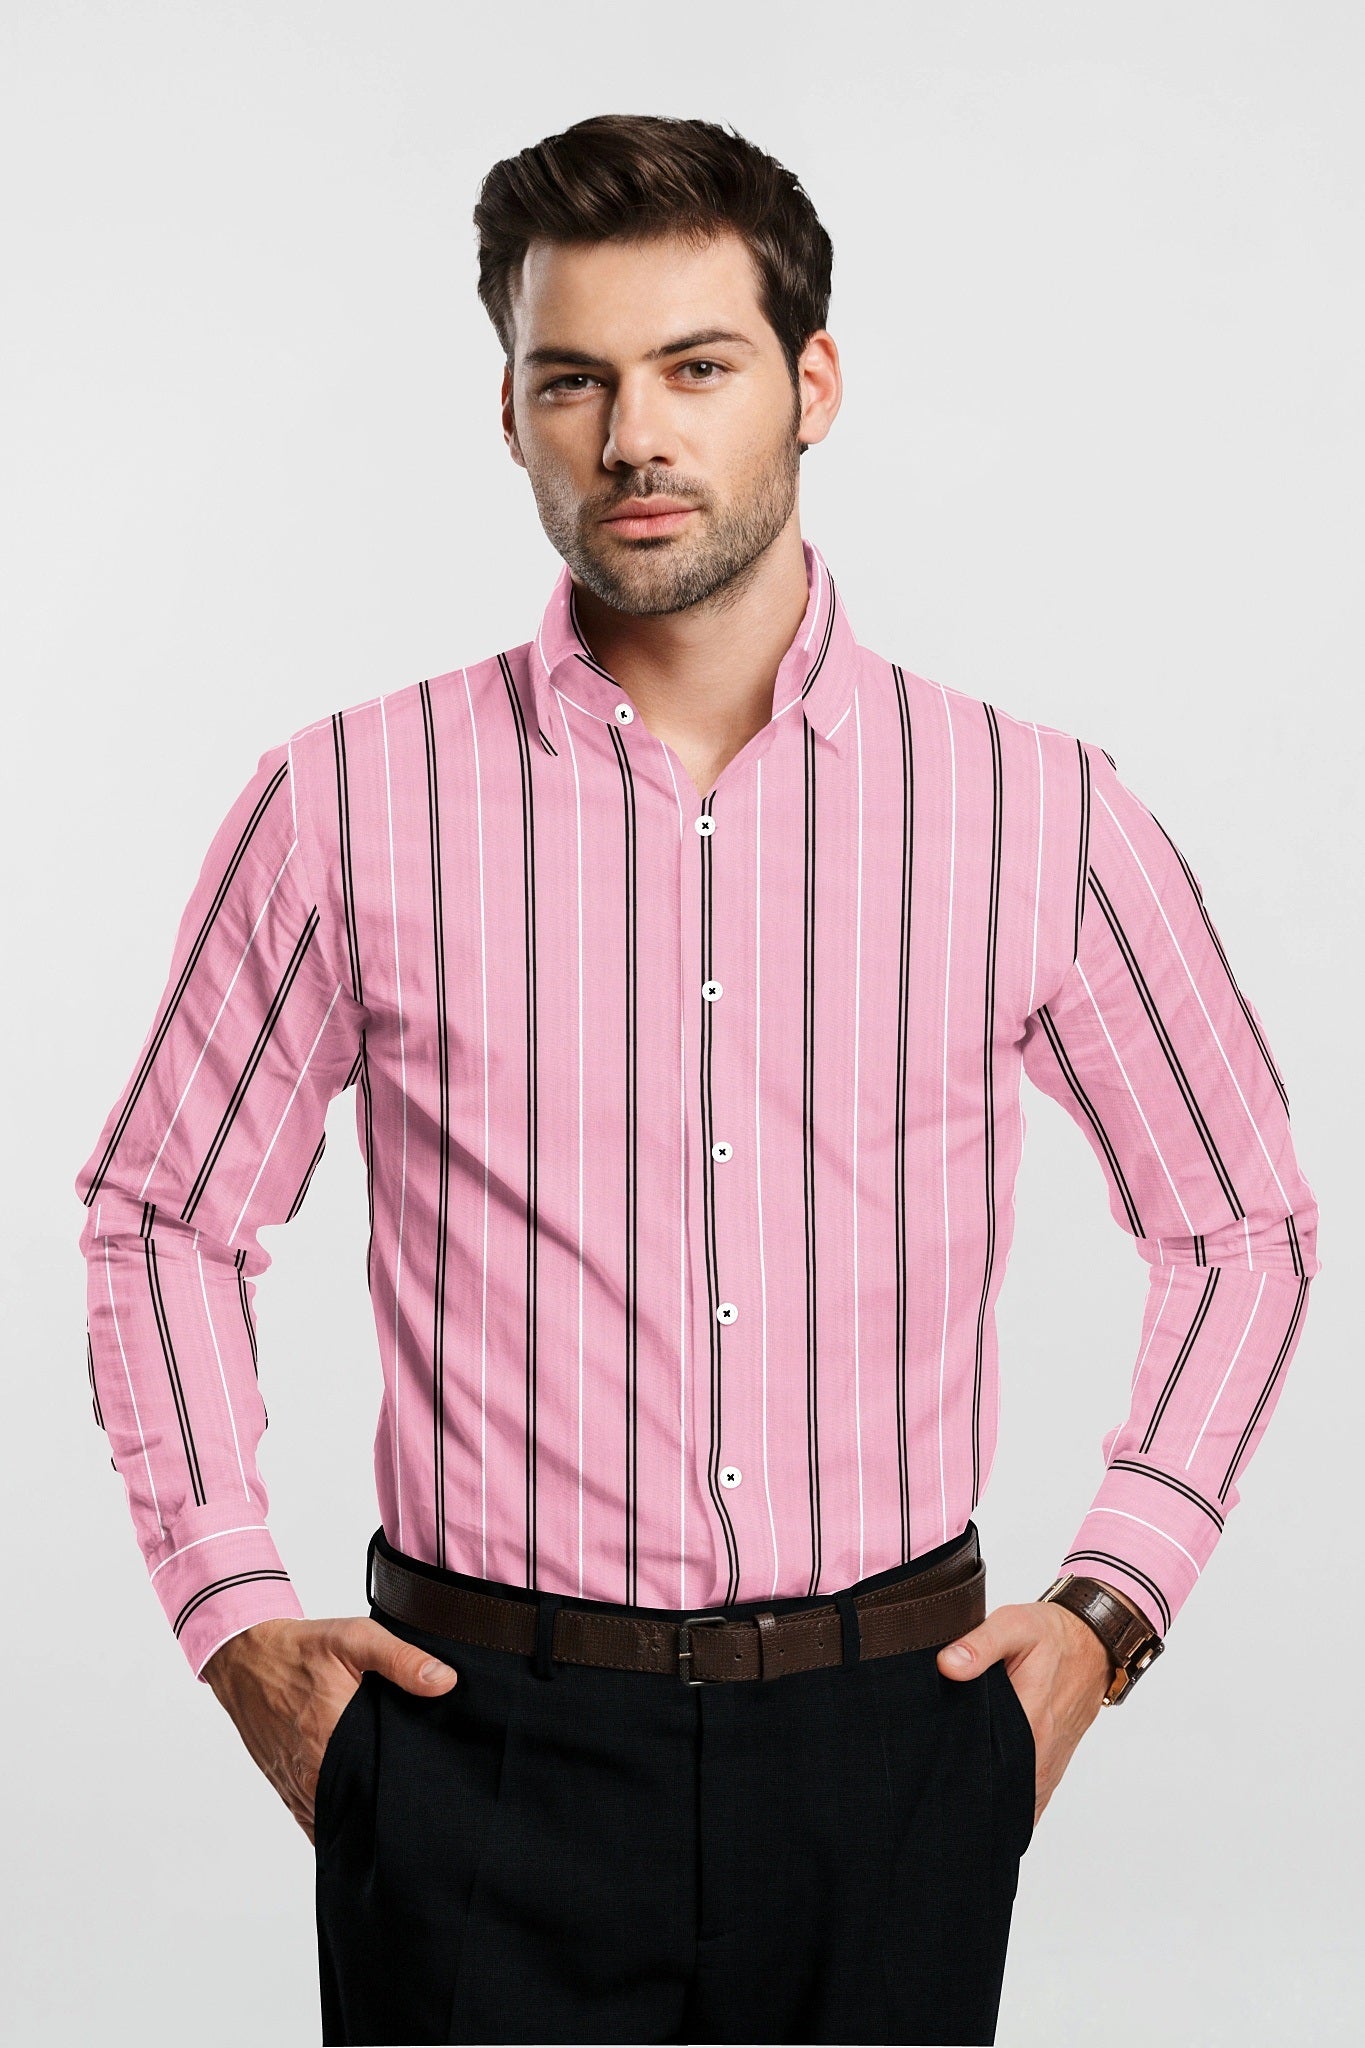 Geranium Pink with Black and White Stripes Cotton Shirt